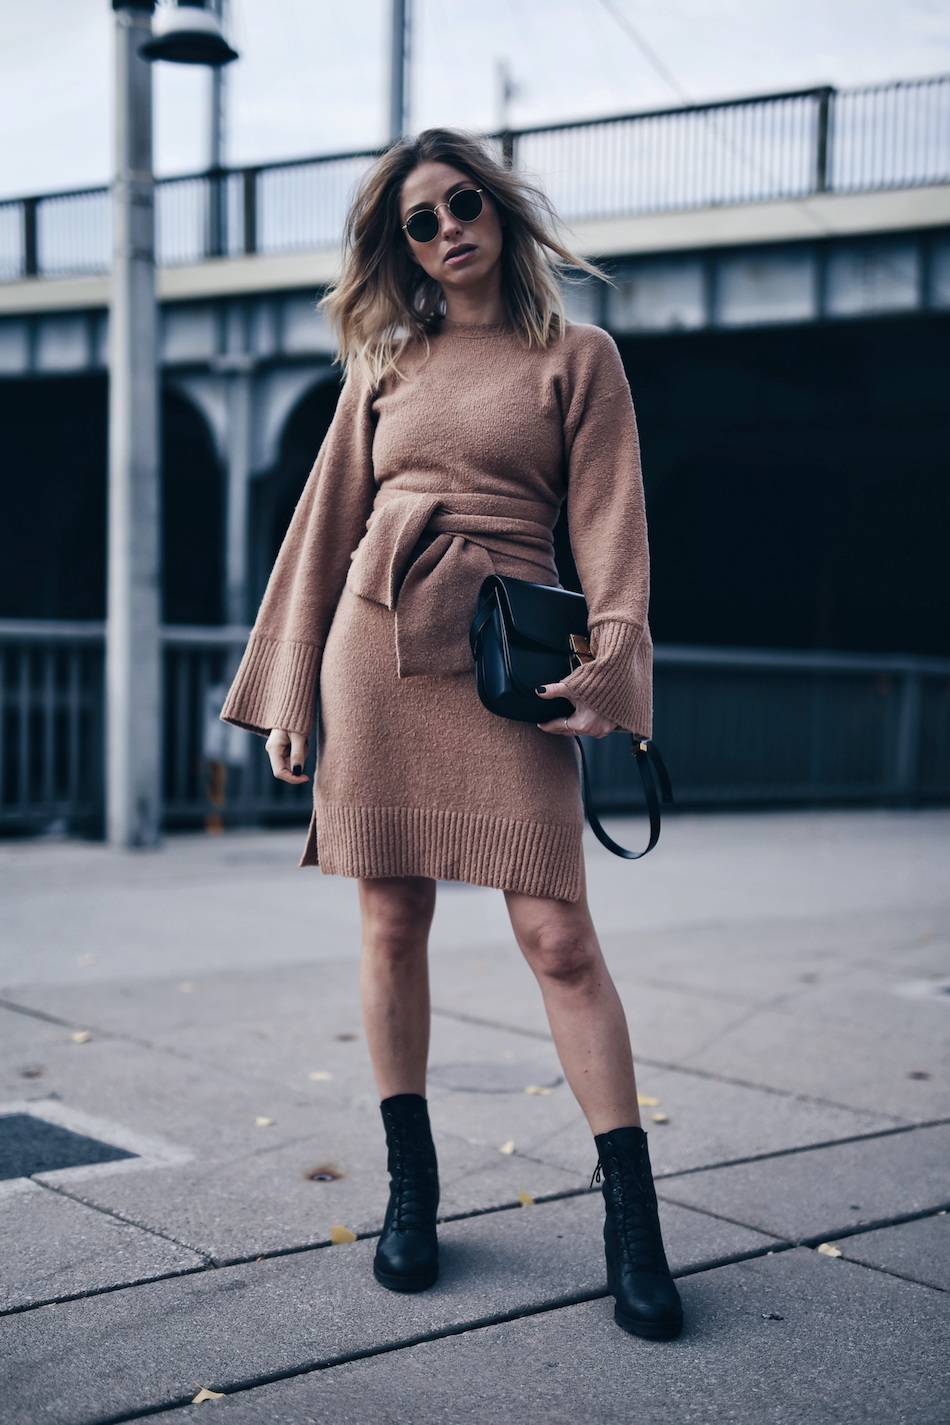 style-and-beauty-blogger-jill-lansky-of-the-august-diaries-wearing-3-1-phillip-lim-wide-sleeve-belted-dress-celine-black-box-bag-and-ld-tuttle-combat-boots